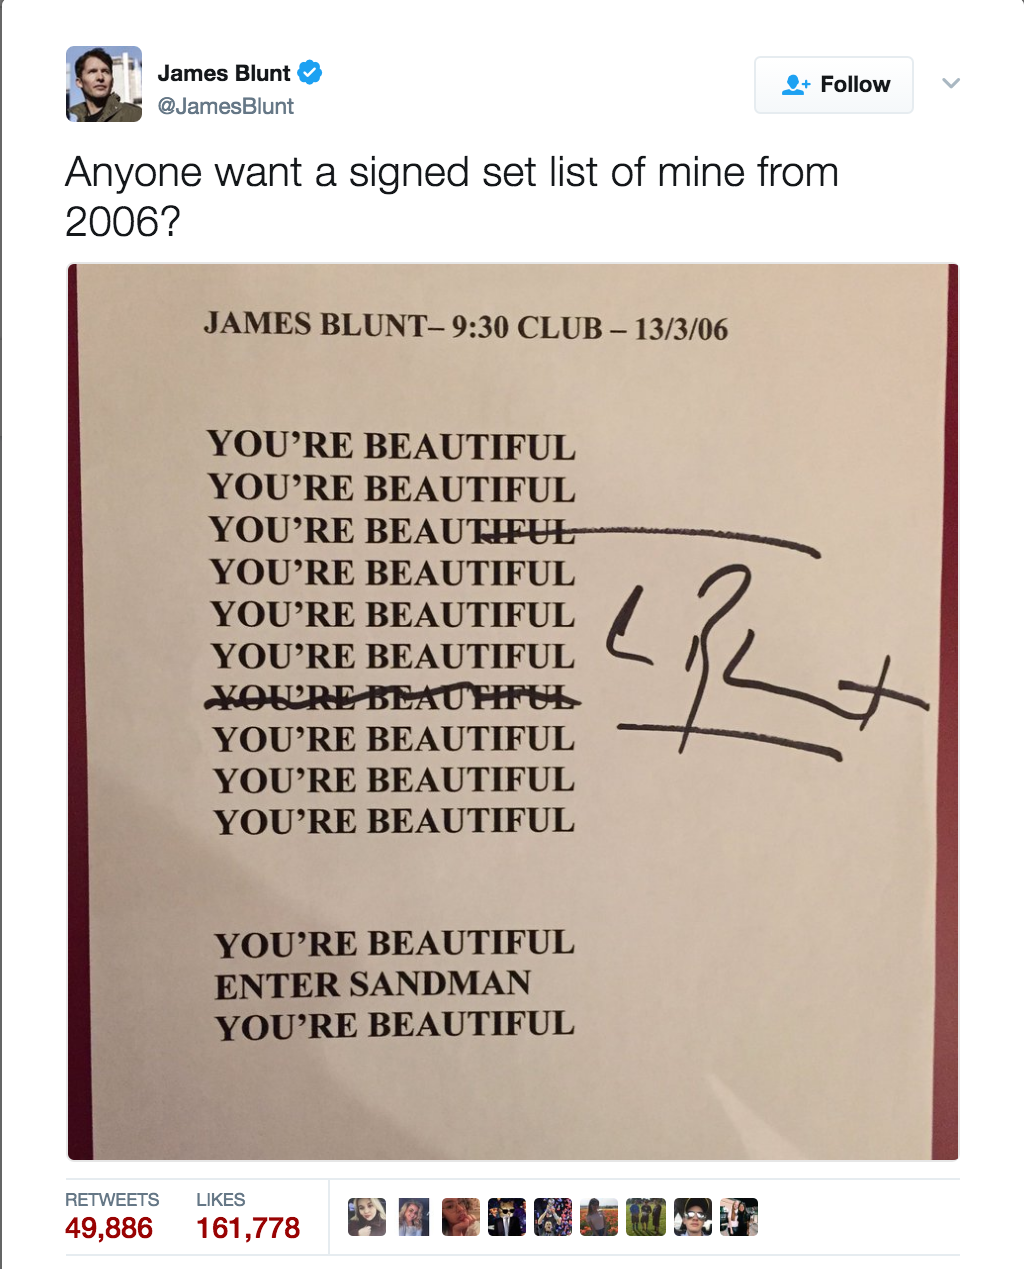 funny setlist - James Blunt James Blunt . Anyone want a signed set list of mine from 2006? James Blunt Club 13306 You'Re Beautiful You'Re Beautiful You'Re Beautiful You'Re Beautiful You'Re Beautiful You'Re Beautiful Youre Drauffel You'Re Beautiful You'Re 